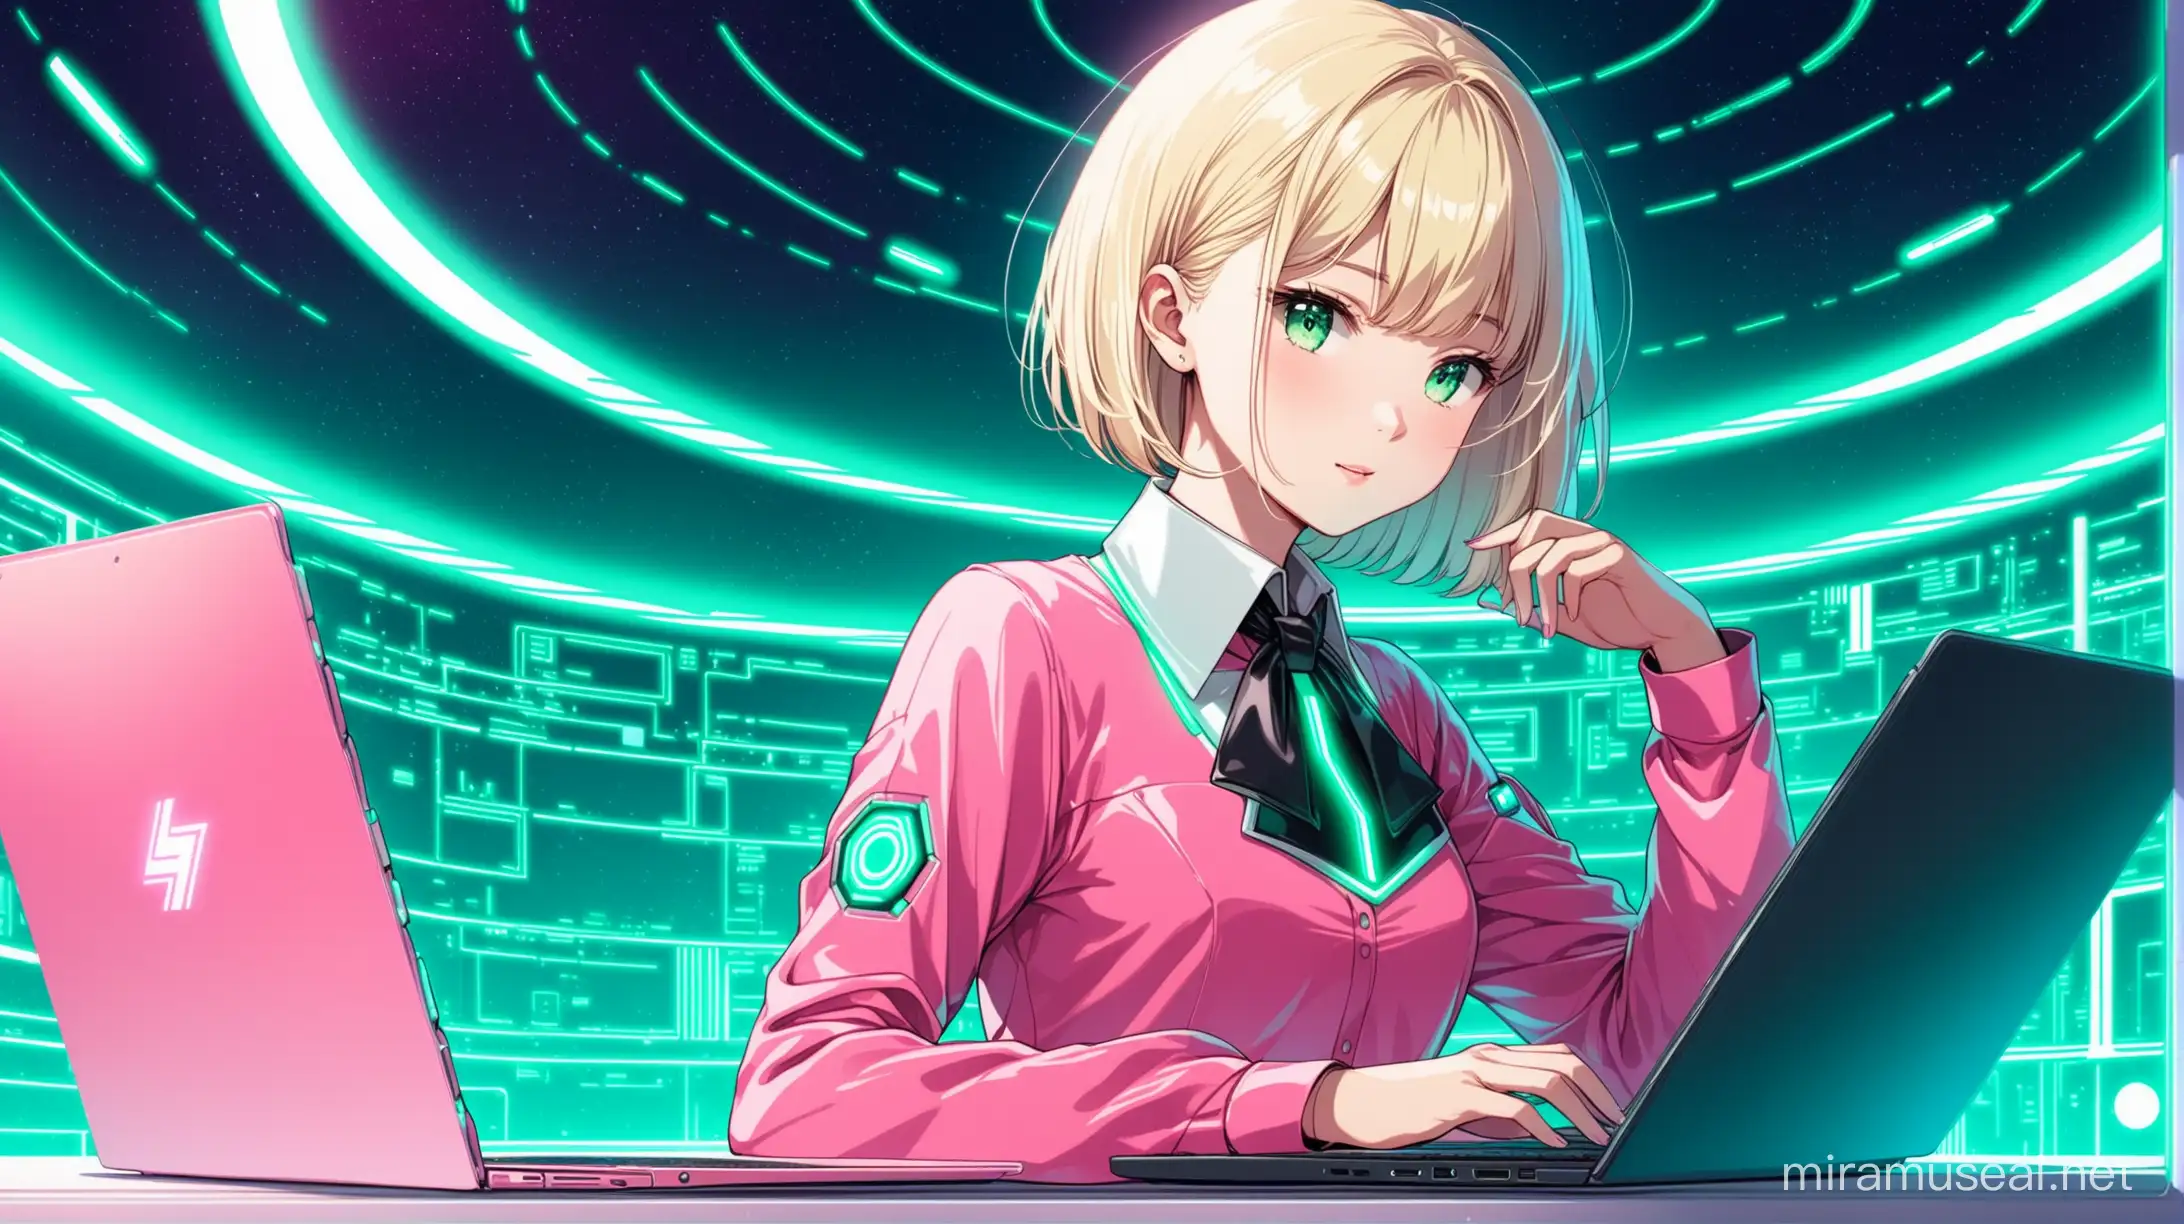 a platinum-blonde short hair girl wearing pink shirt with cravat works with laptop in futuristic-vibe background with mint color